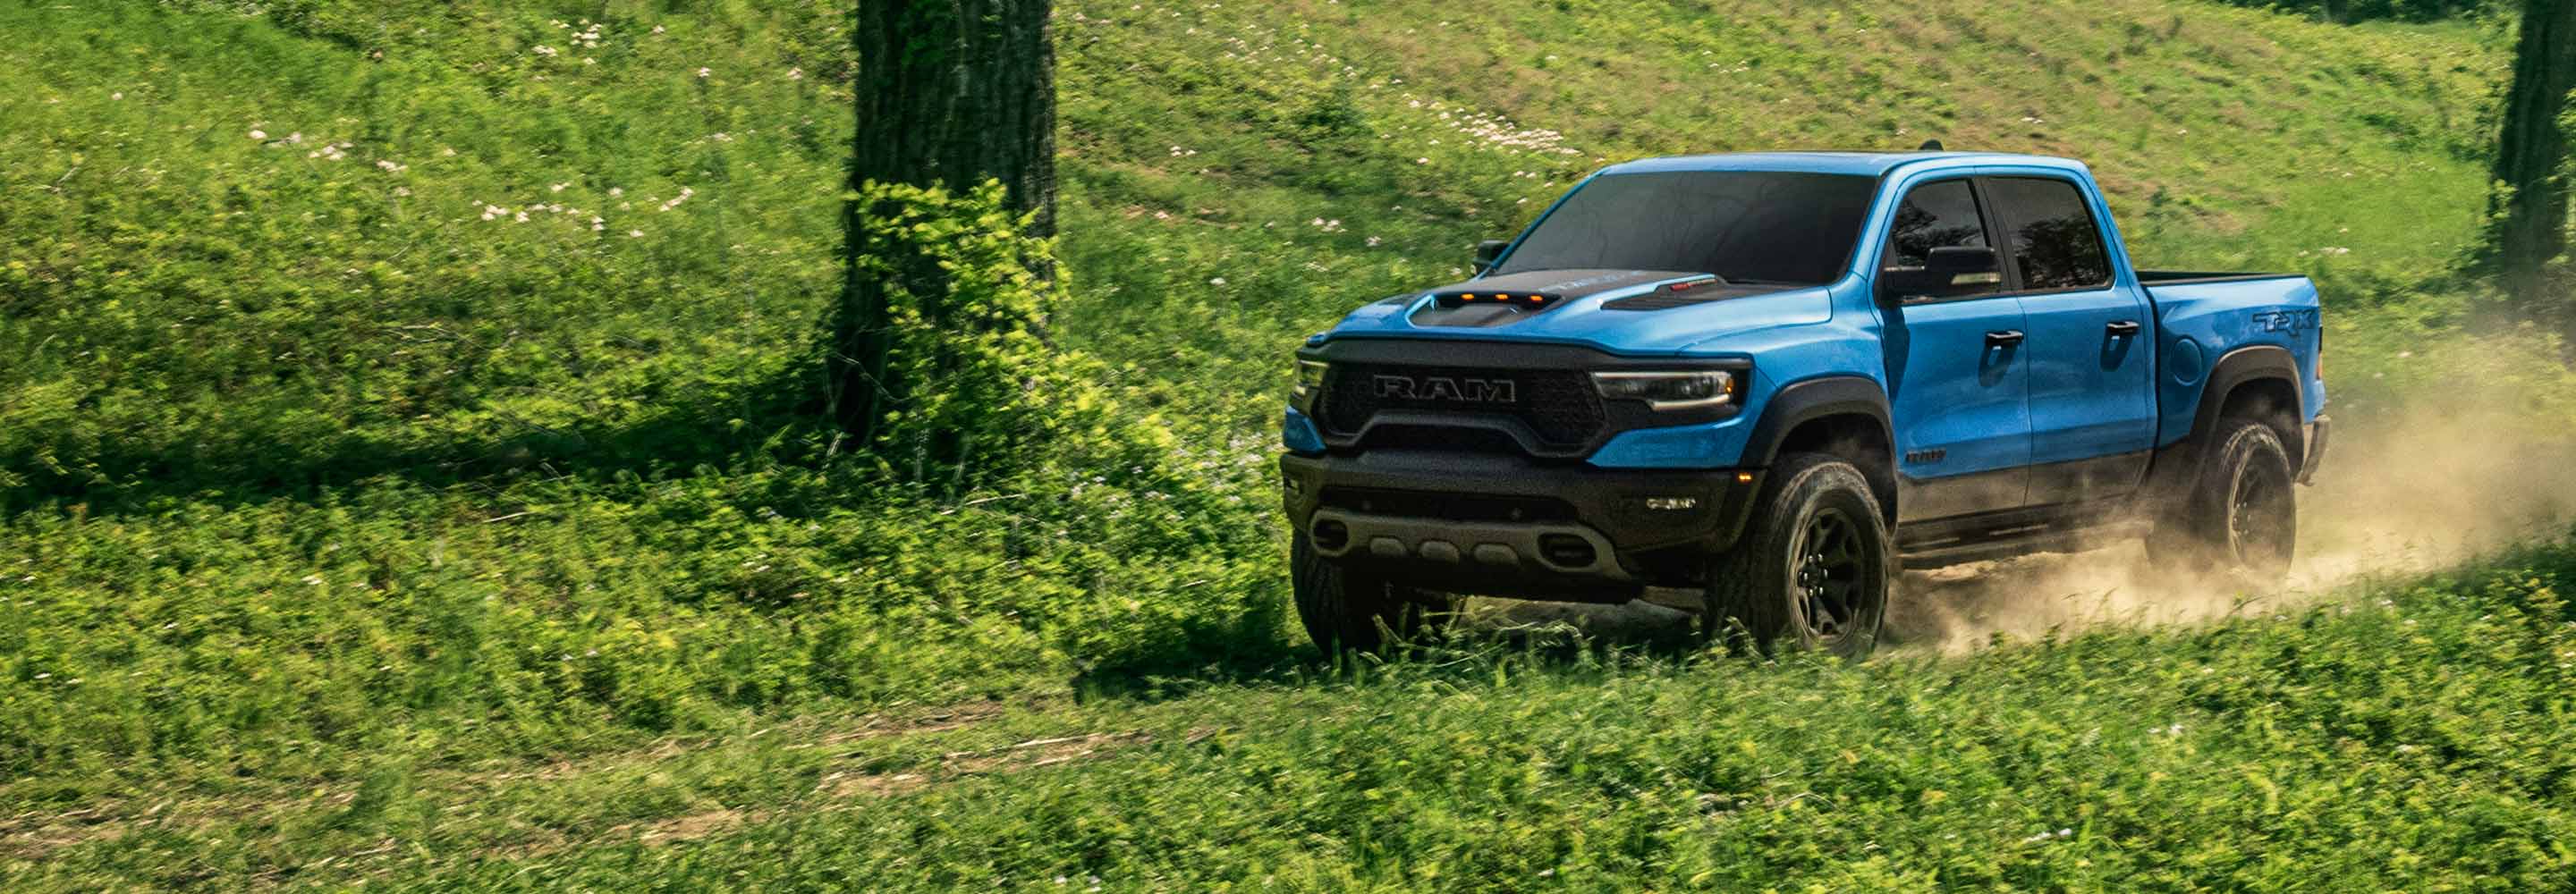 The 2023 Ram 1500 TRX being driven on a rough trail through the grass, dust rising from its wheels.